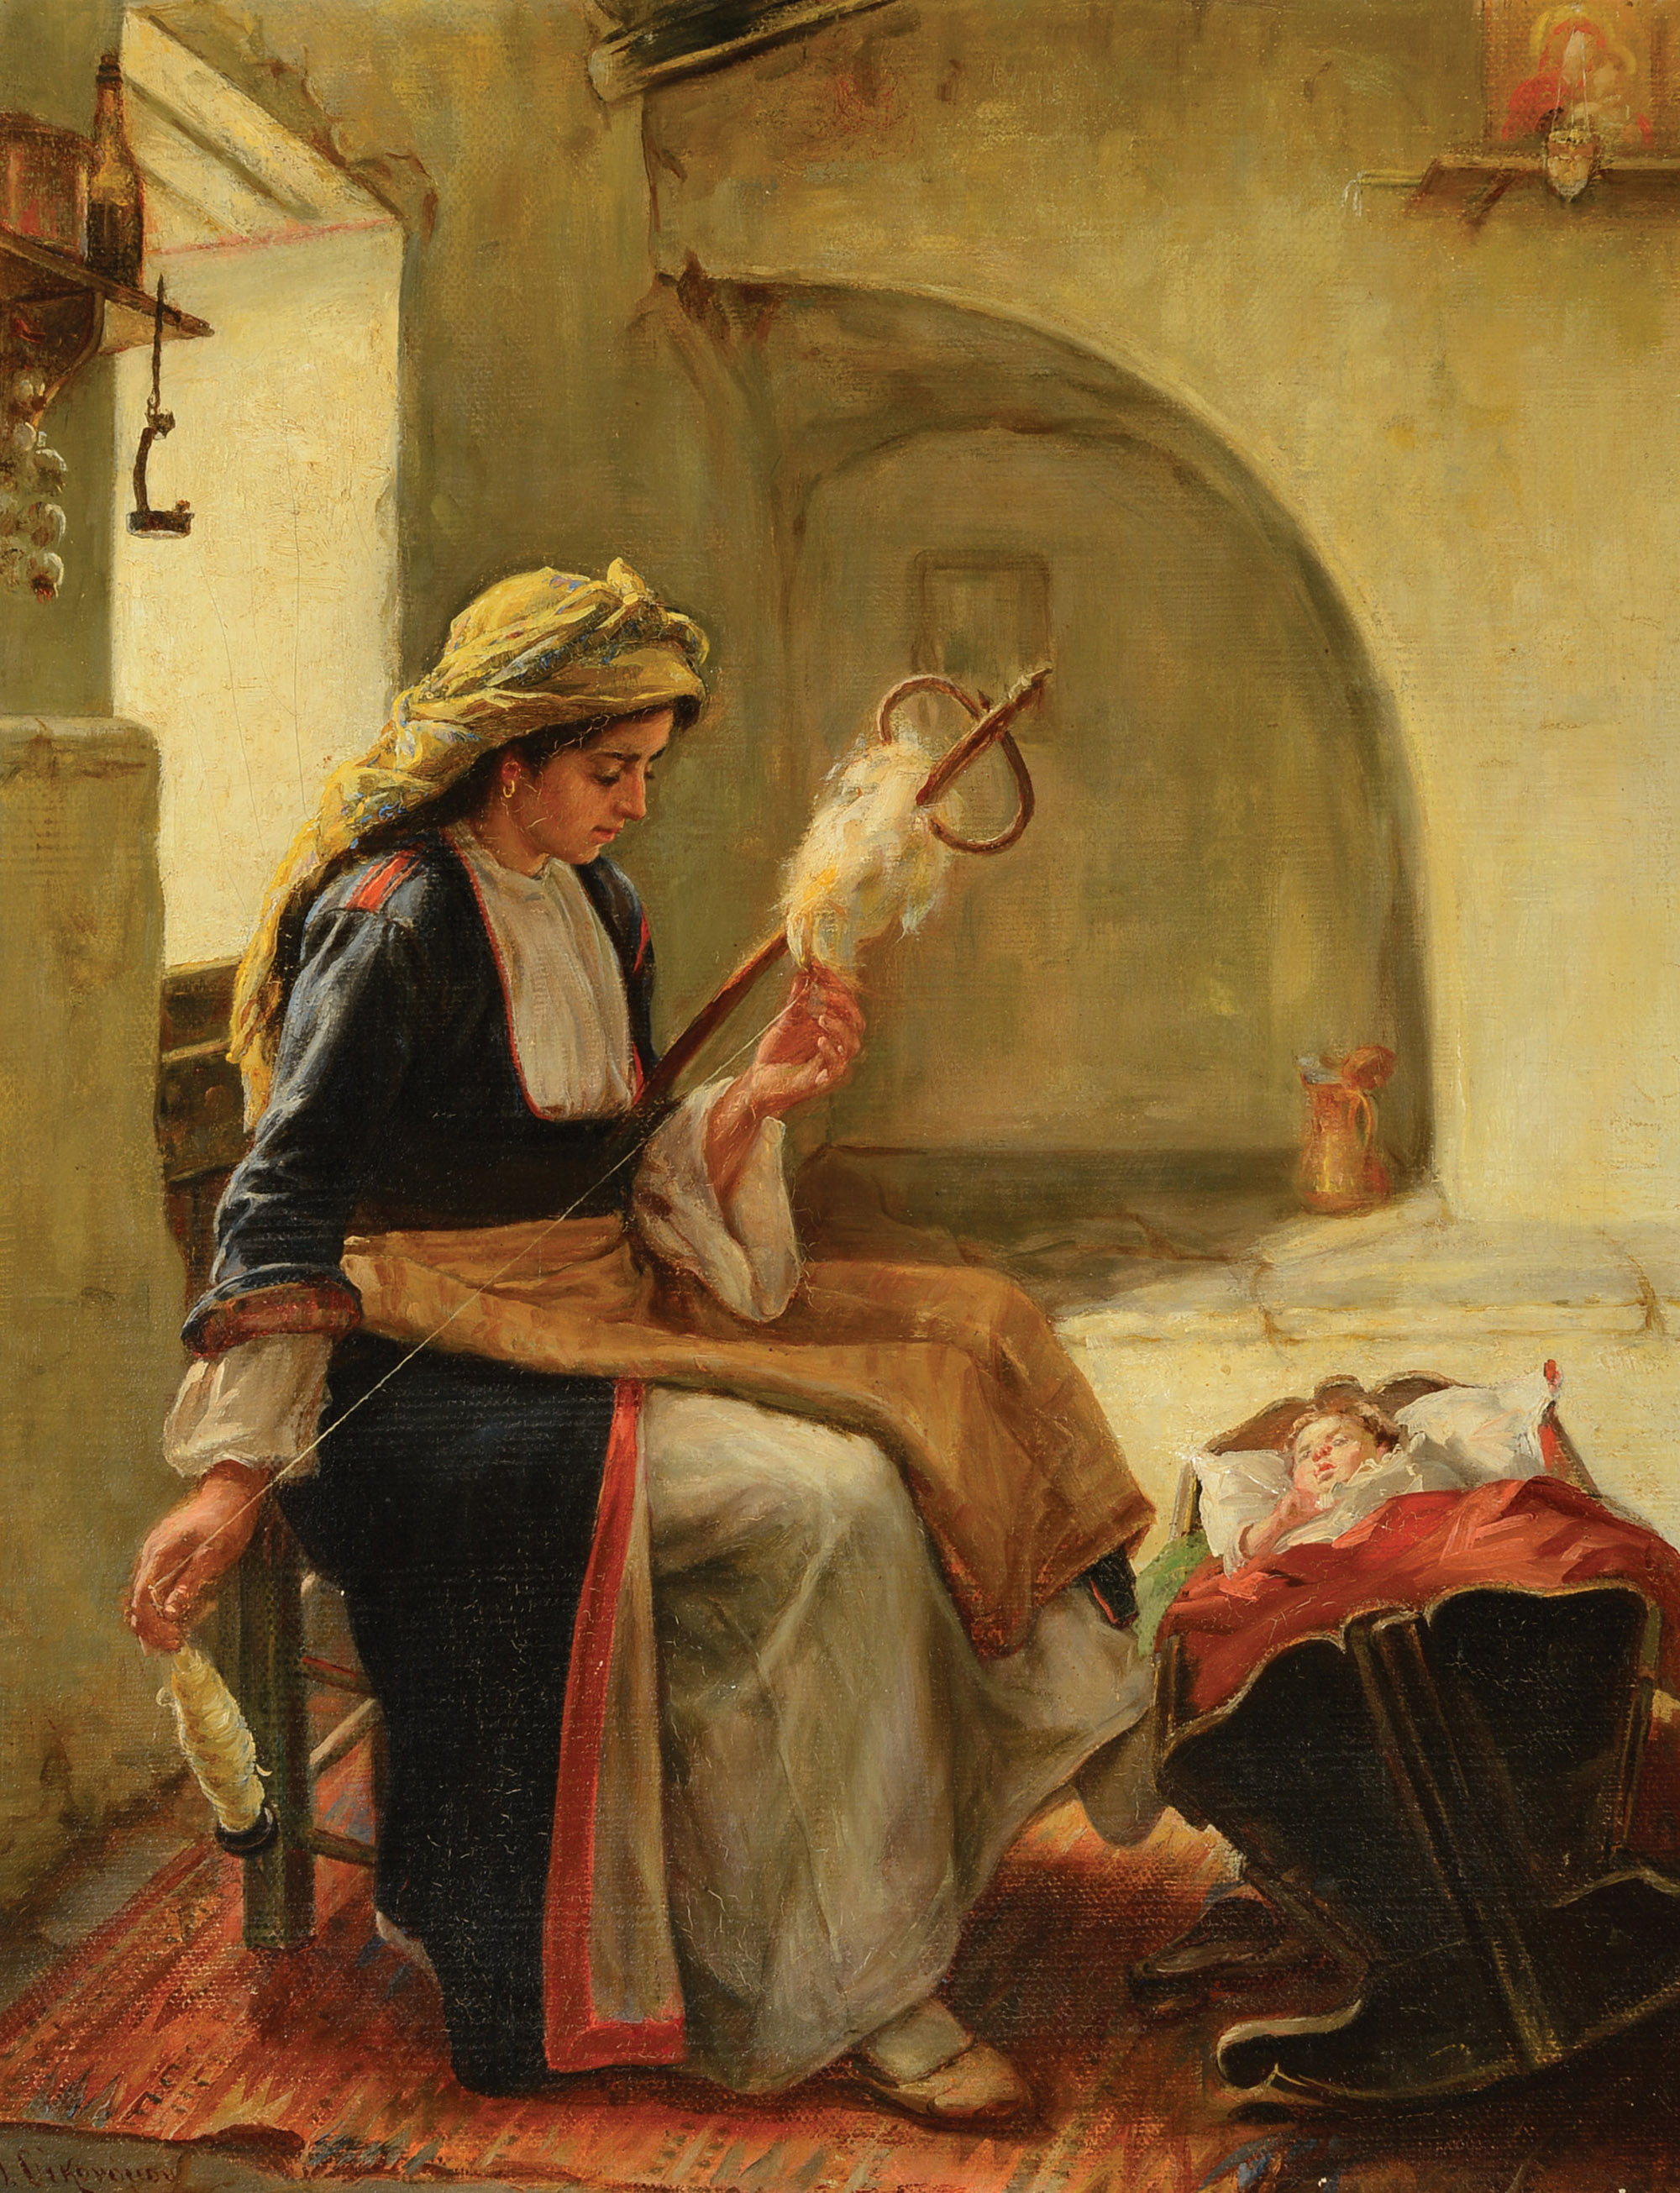 Greek School, 'Woman and Child,' oil on canvas, late 19th/early 20th century. Price realized: $6,490. Michaan's image